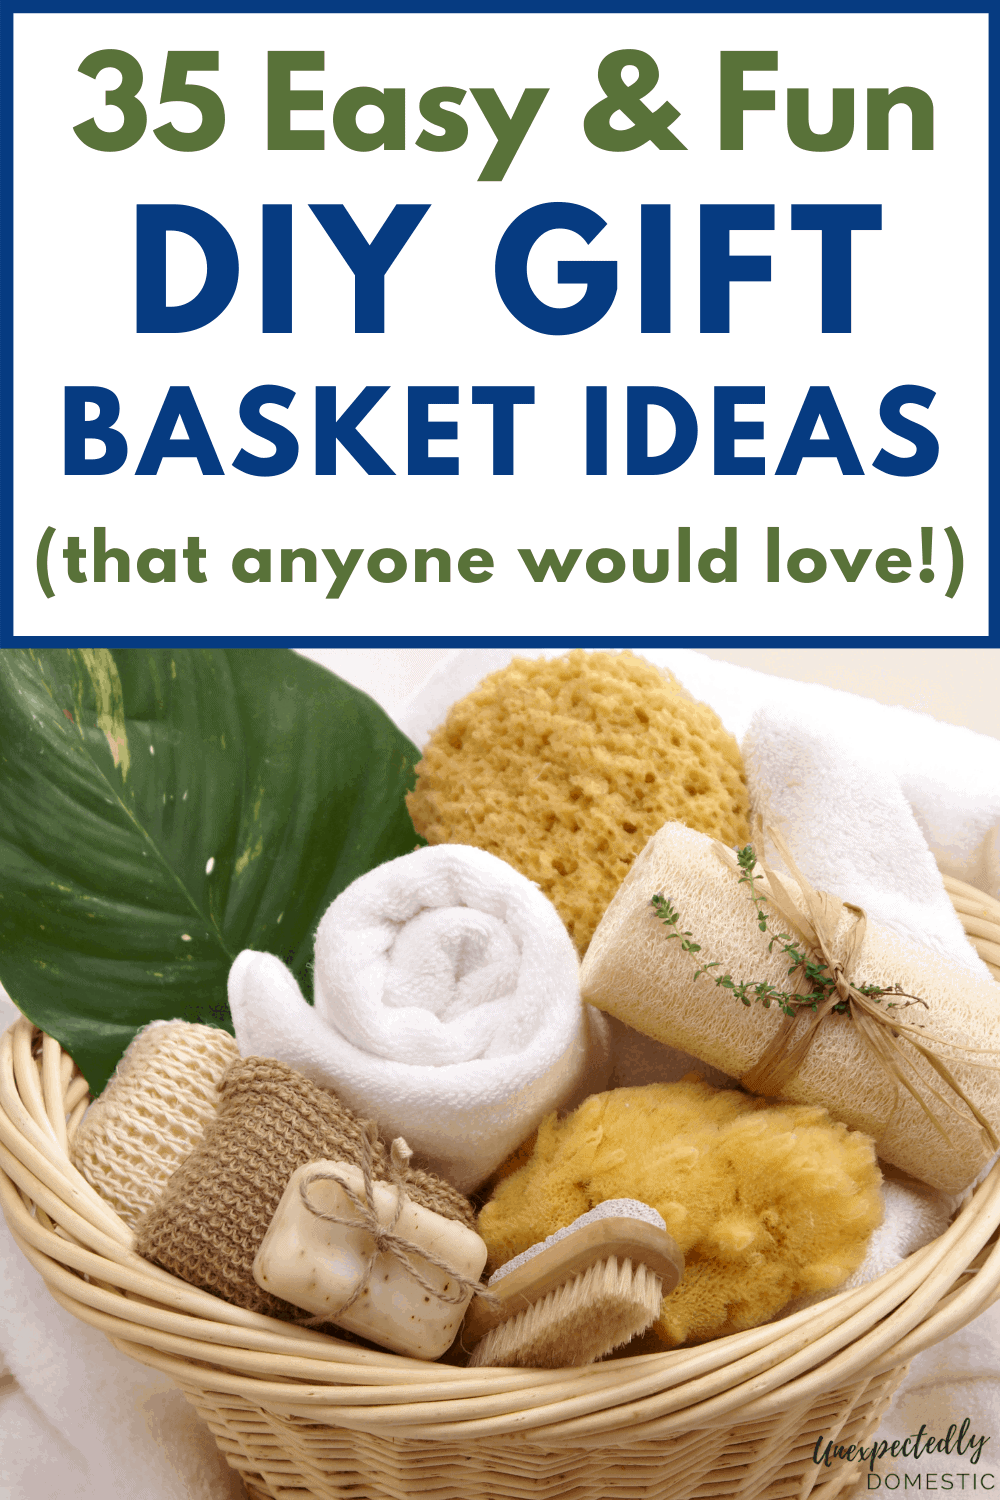 DIY gift basket ideas! This list of things to put in a gift basket will give you lots of ideas for easy and affordable presents for any occasion.